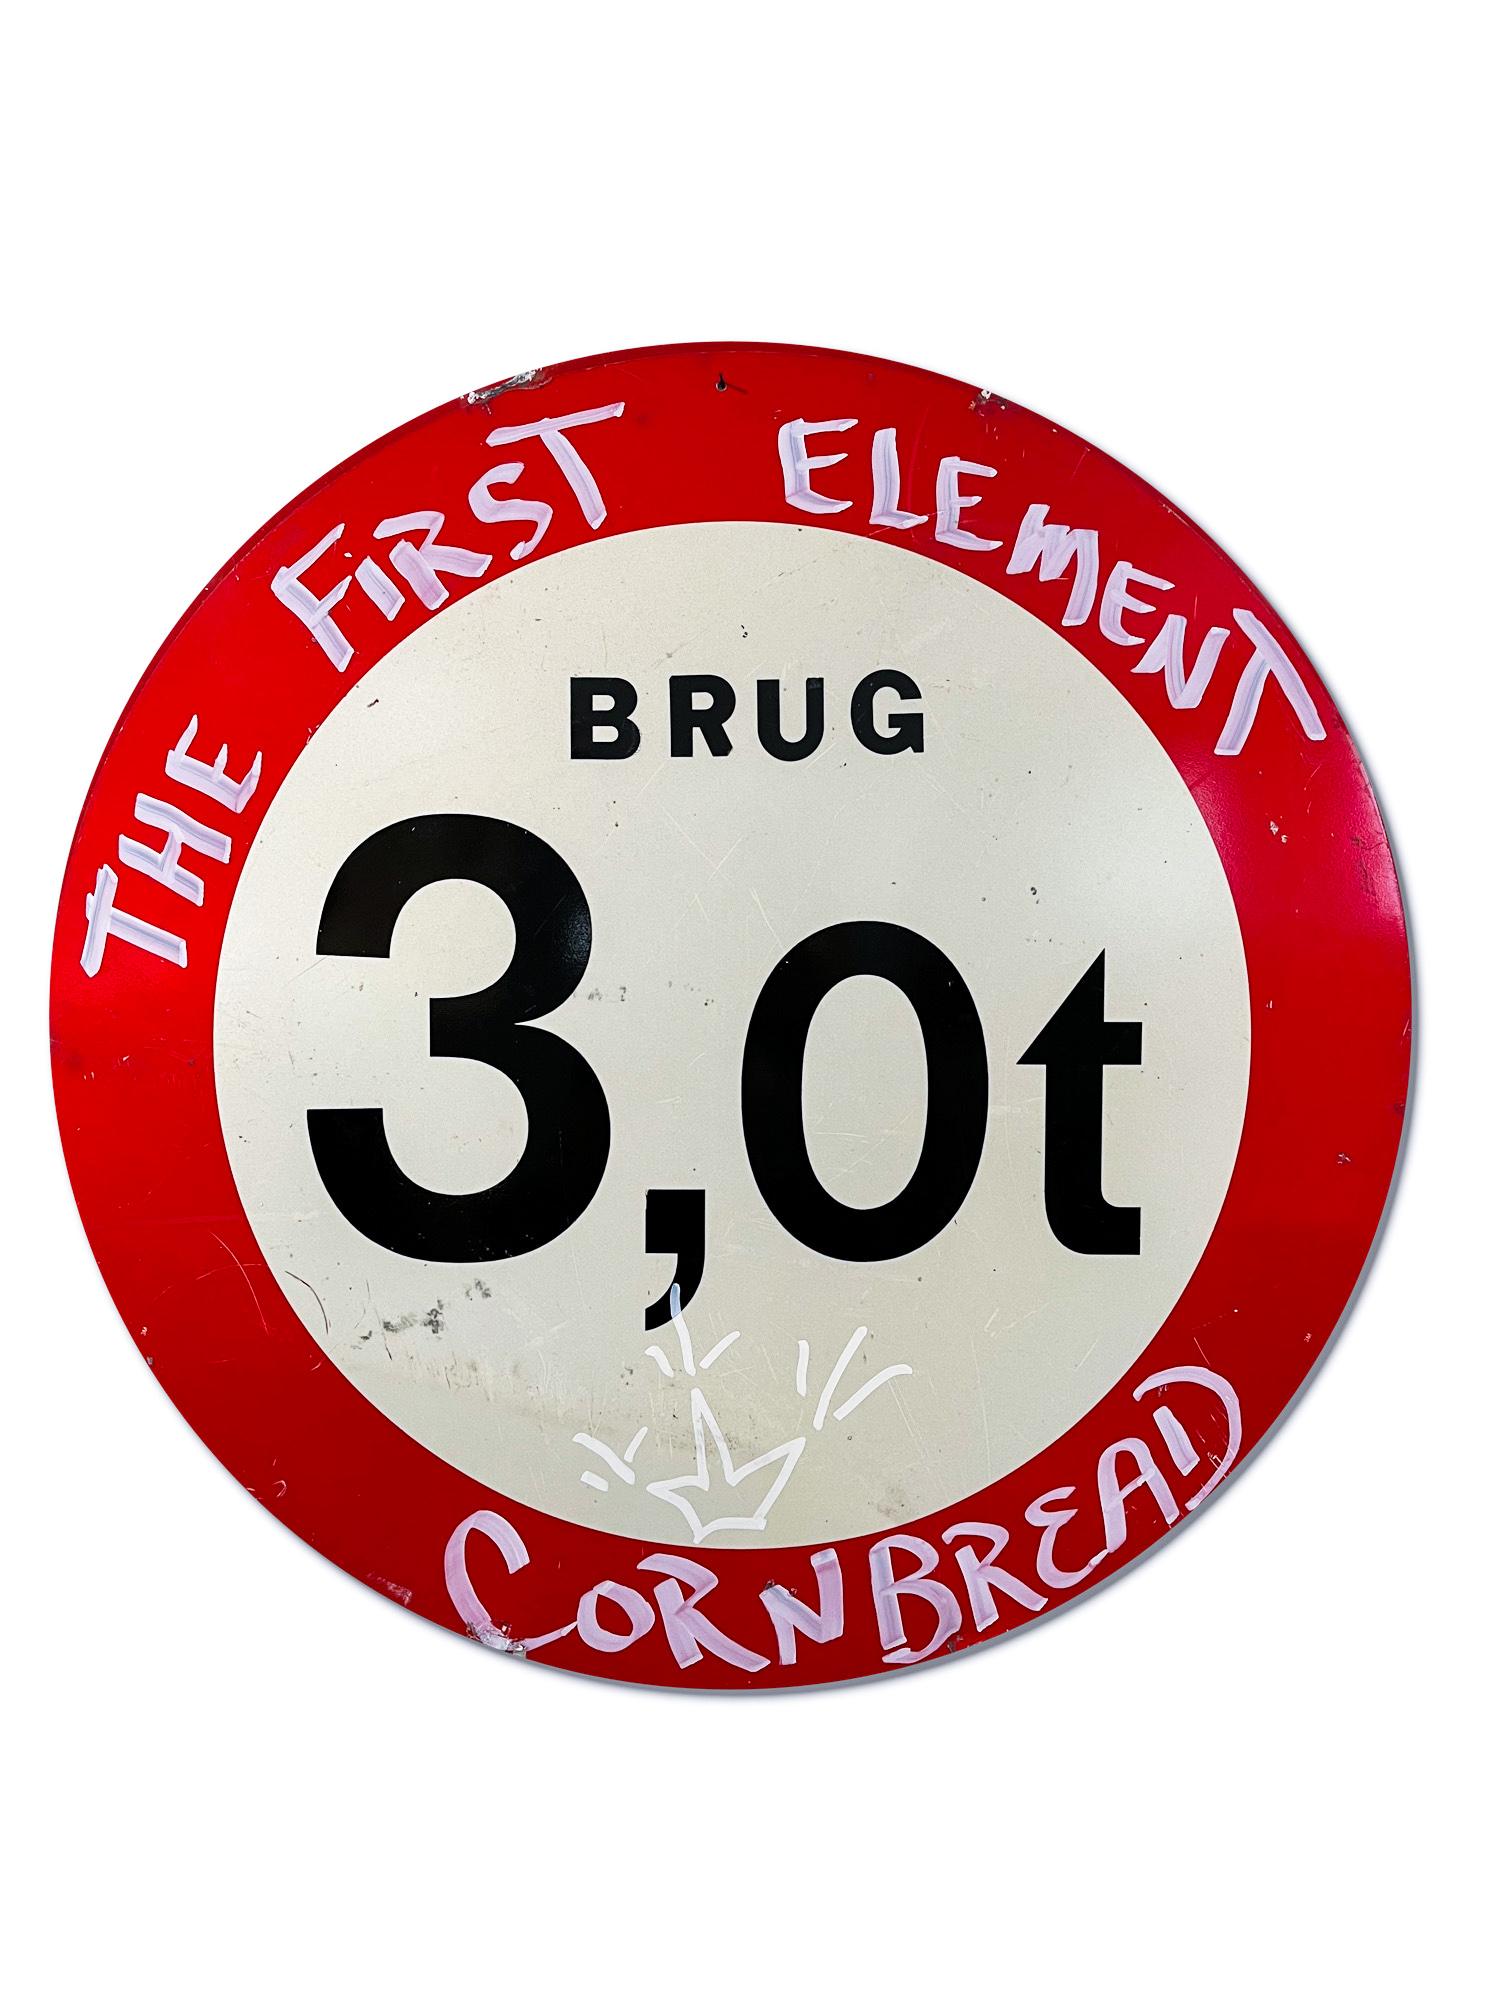 This artwork titled "Cornbread The First Element Shield (Brug)" is an original artwork by Cornbread made of acrylic paint on a retired Amsterdam street sign. The piece measures 80cm / 31.5in diameter.

Darryl McCray, known by his tagging name,